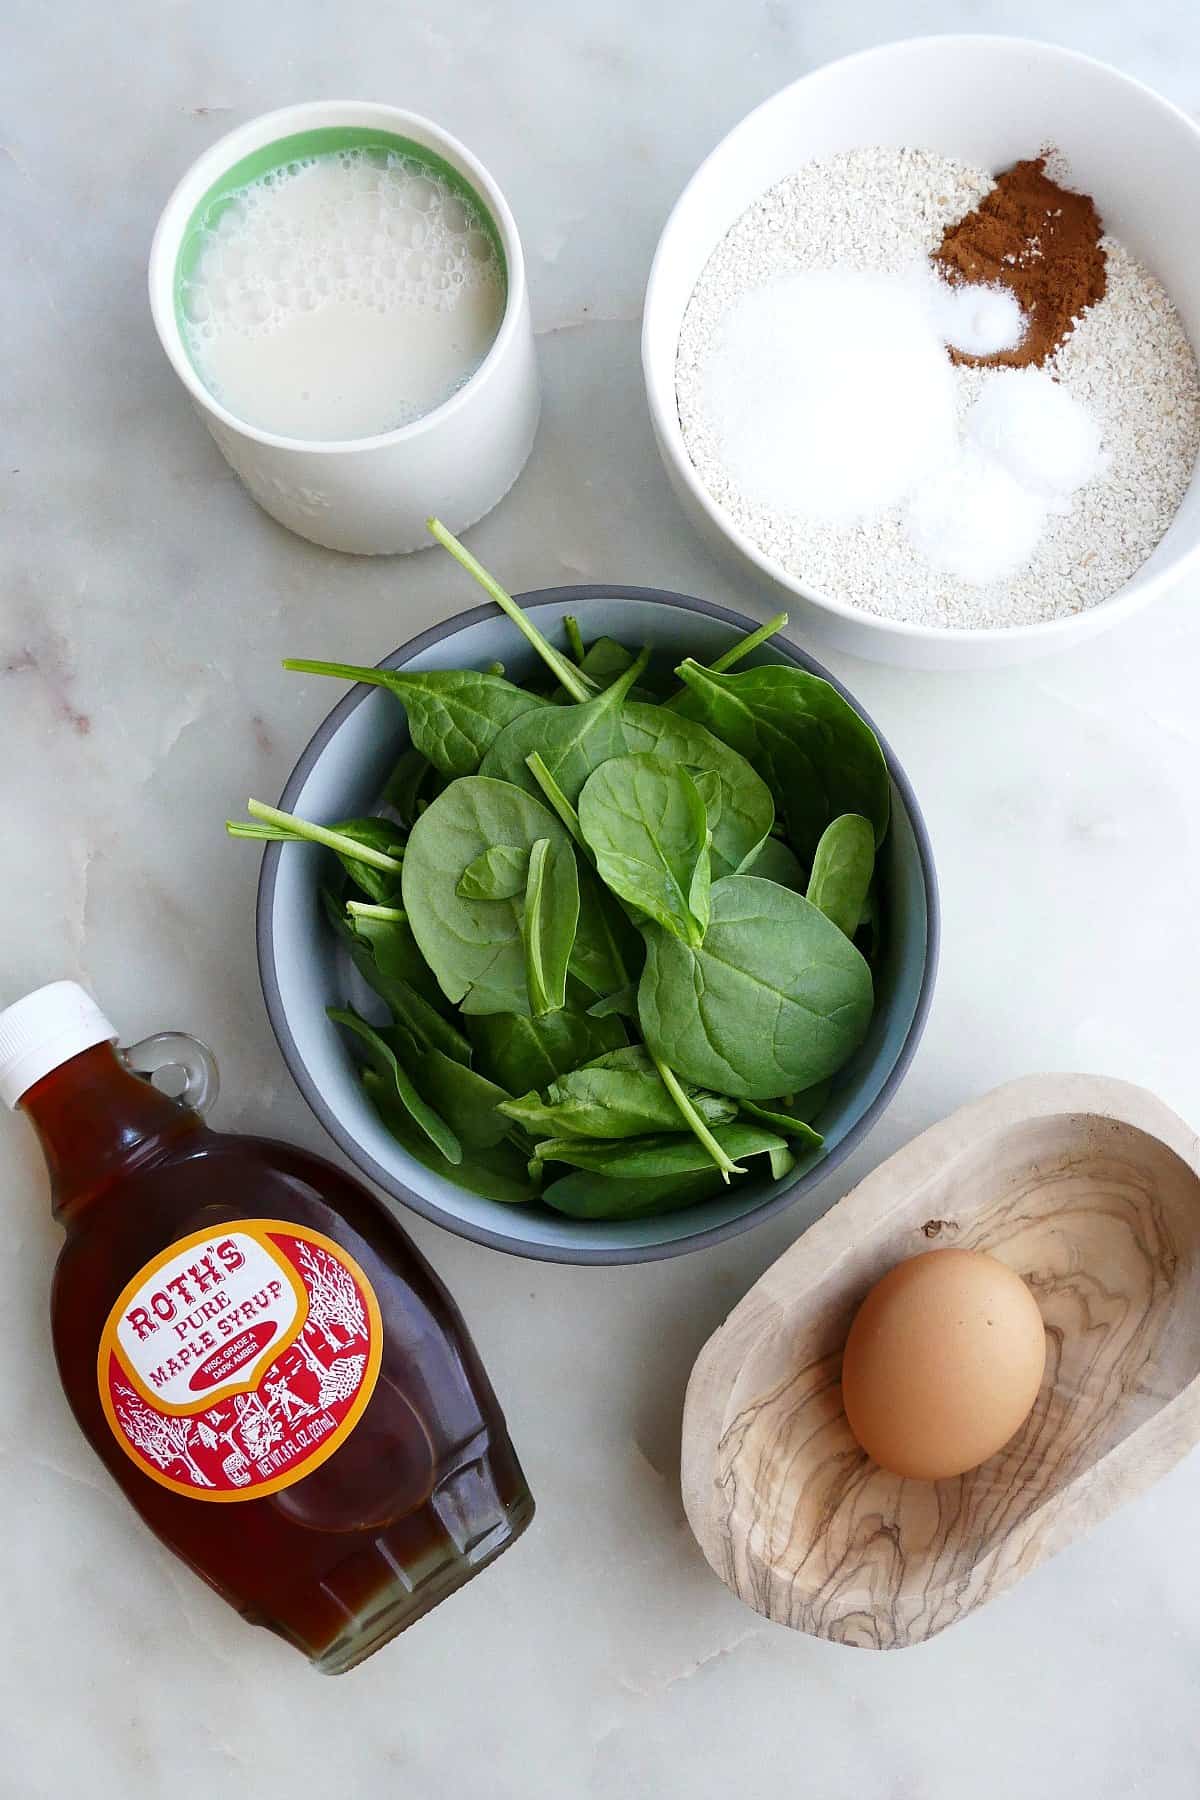 spinach, milk, dry ingredients, and an egg in bowls next to a bottle of syrup